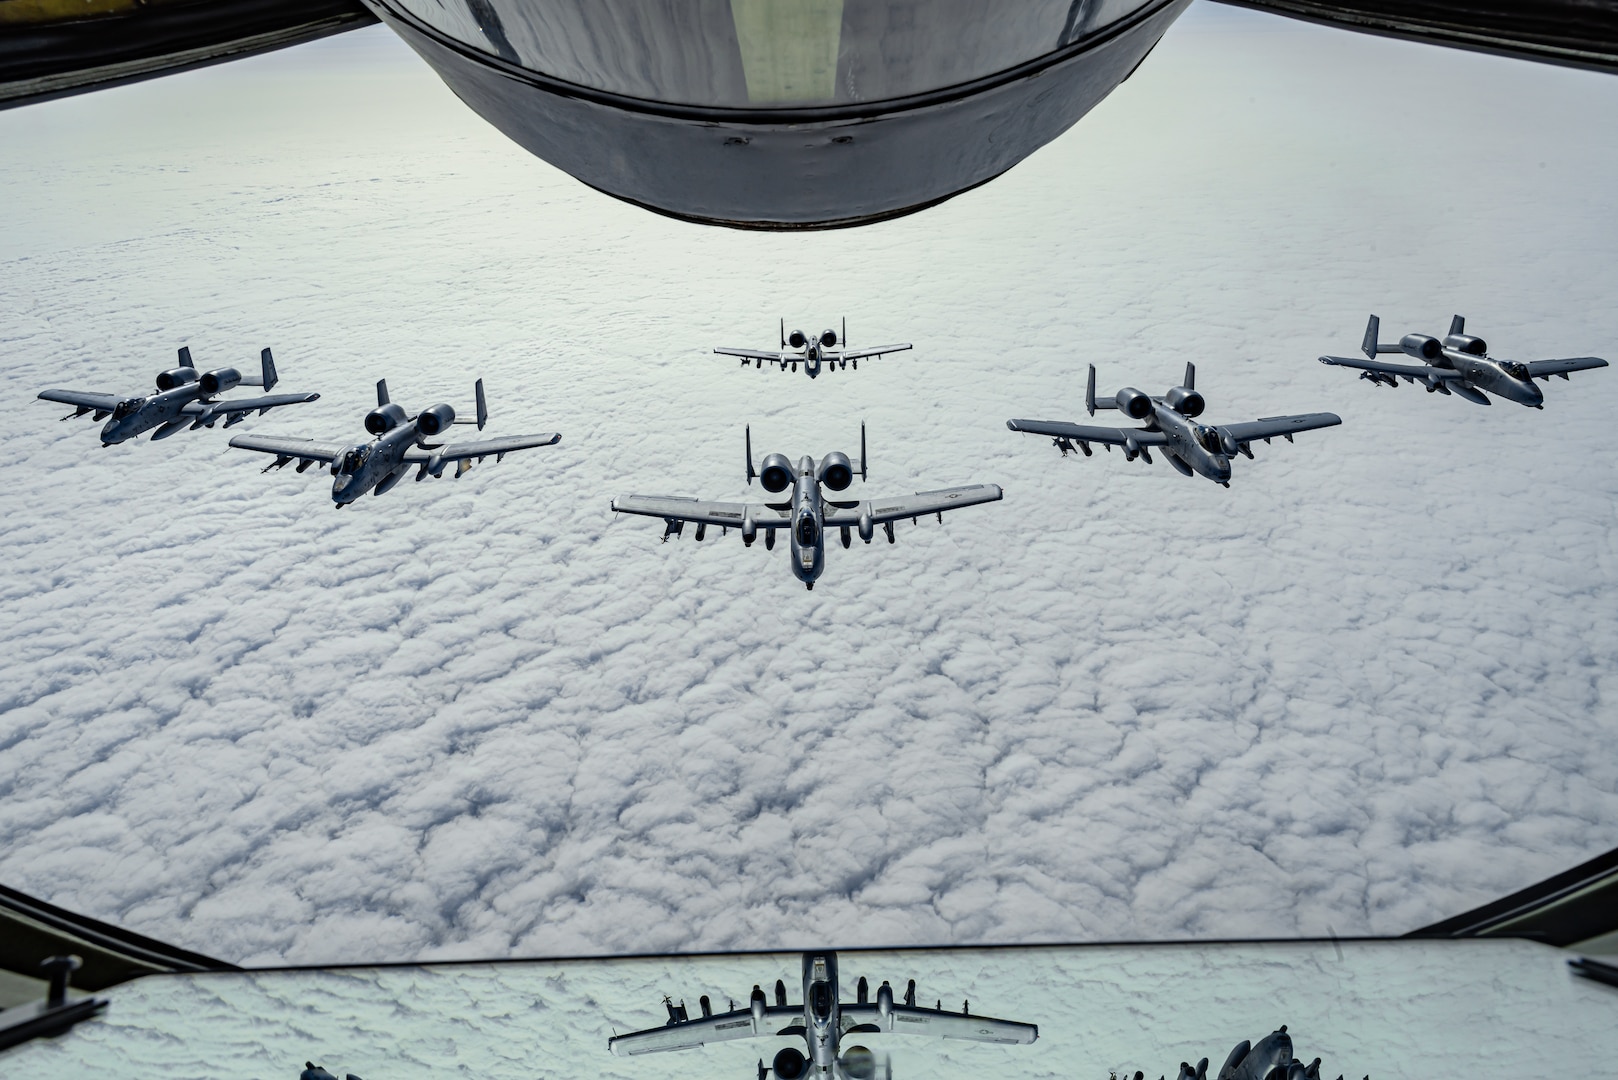 U.S. Air Force A-10 Thunderbolt II aircraft assigned to the 127th Wing, Michigan National Guard, fly in formation behind a KC-135 Stratotanker assigned to the 128th Air Refueling Wing, Wisconsin National Guard, June 5, 2023. Exercise Air Defender integrates U.S. and allied air-power to defend shared values, while leveraging and strengthening vital partnerships to deter aggression around the world.